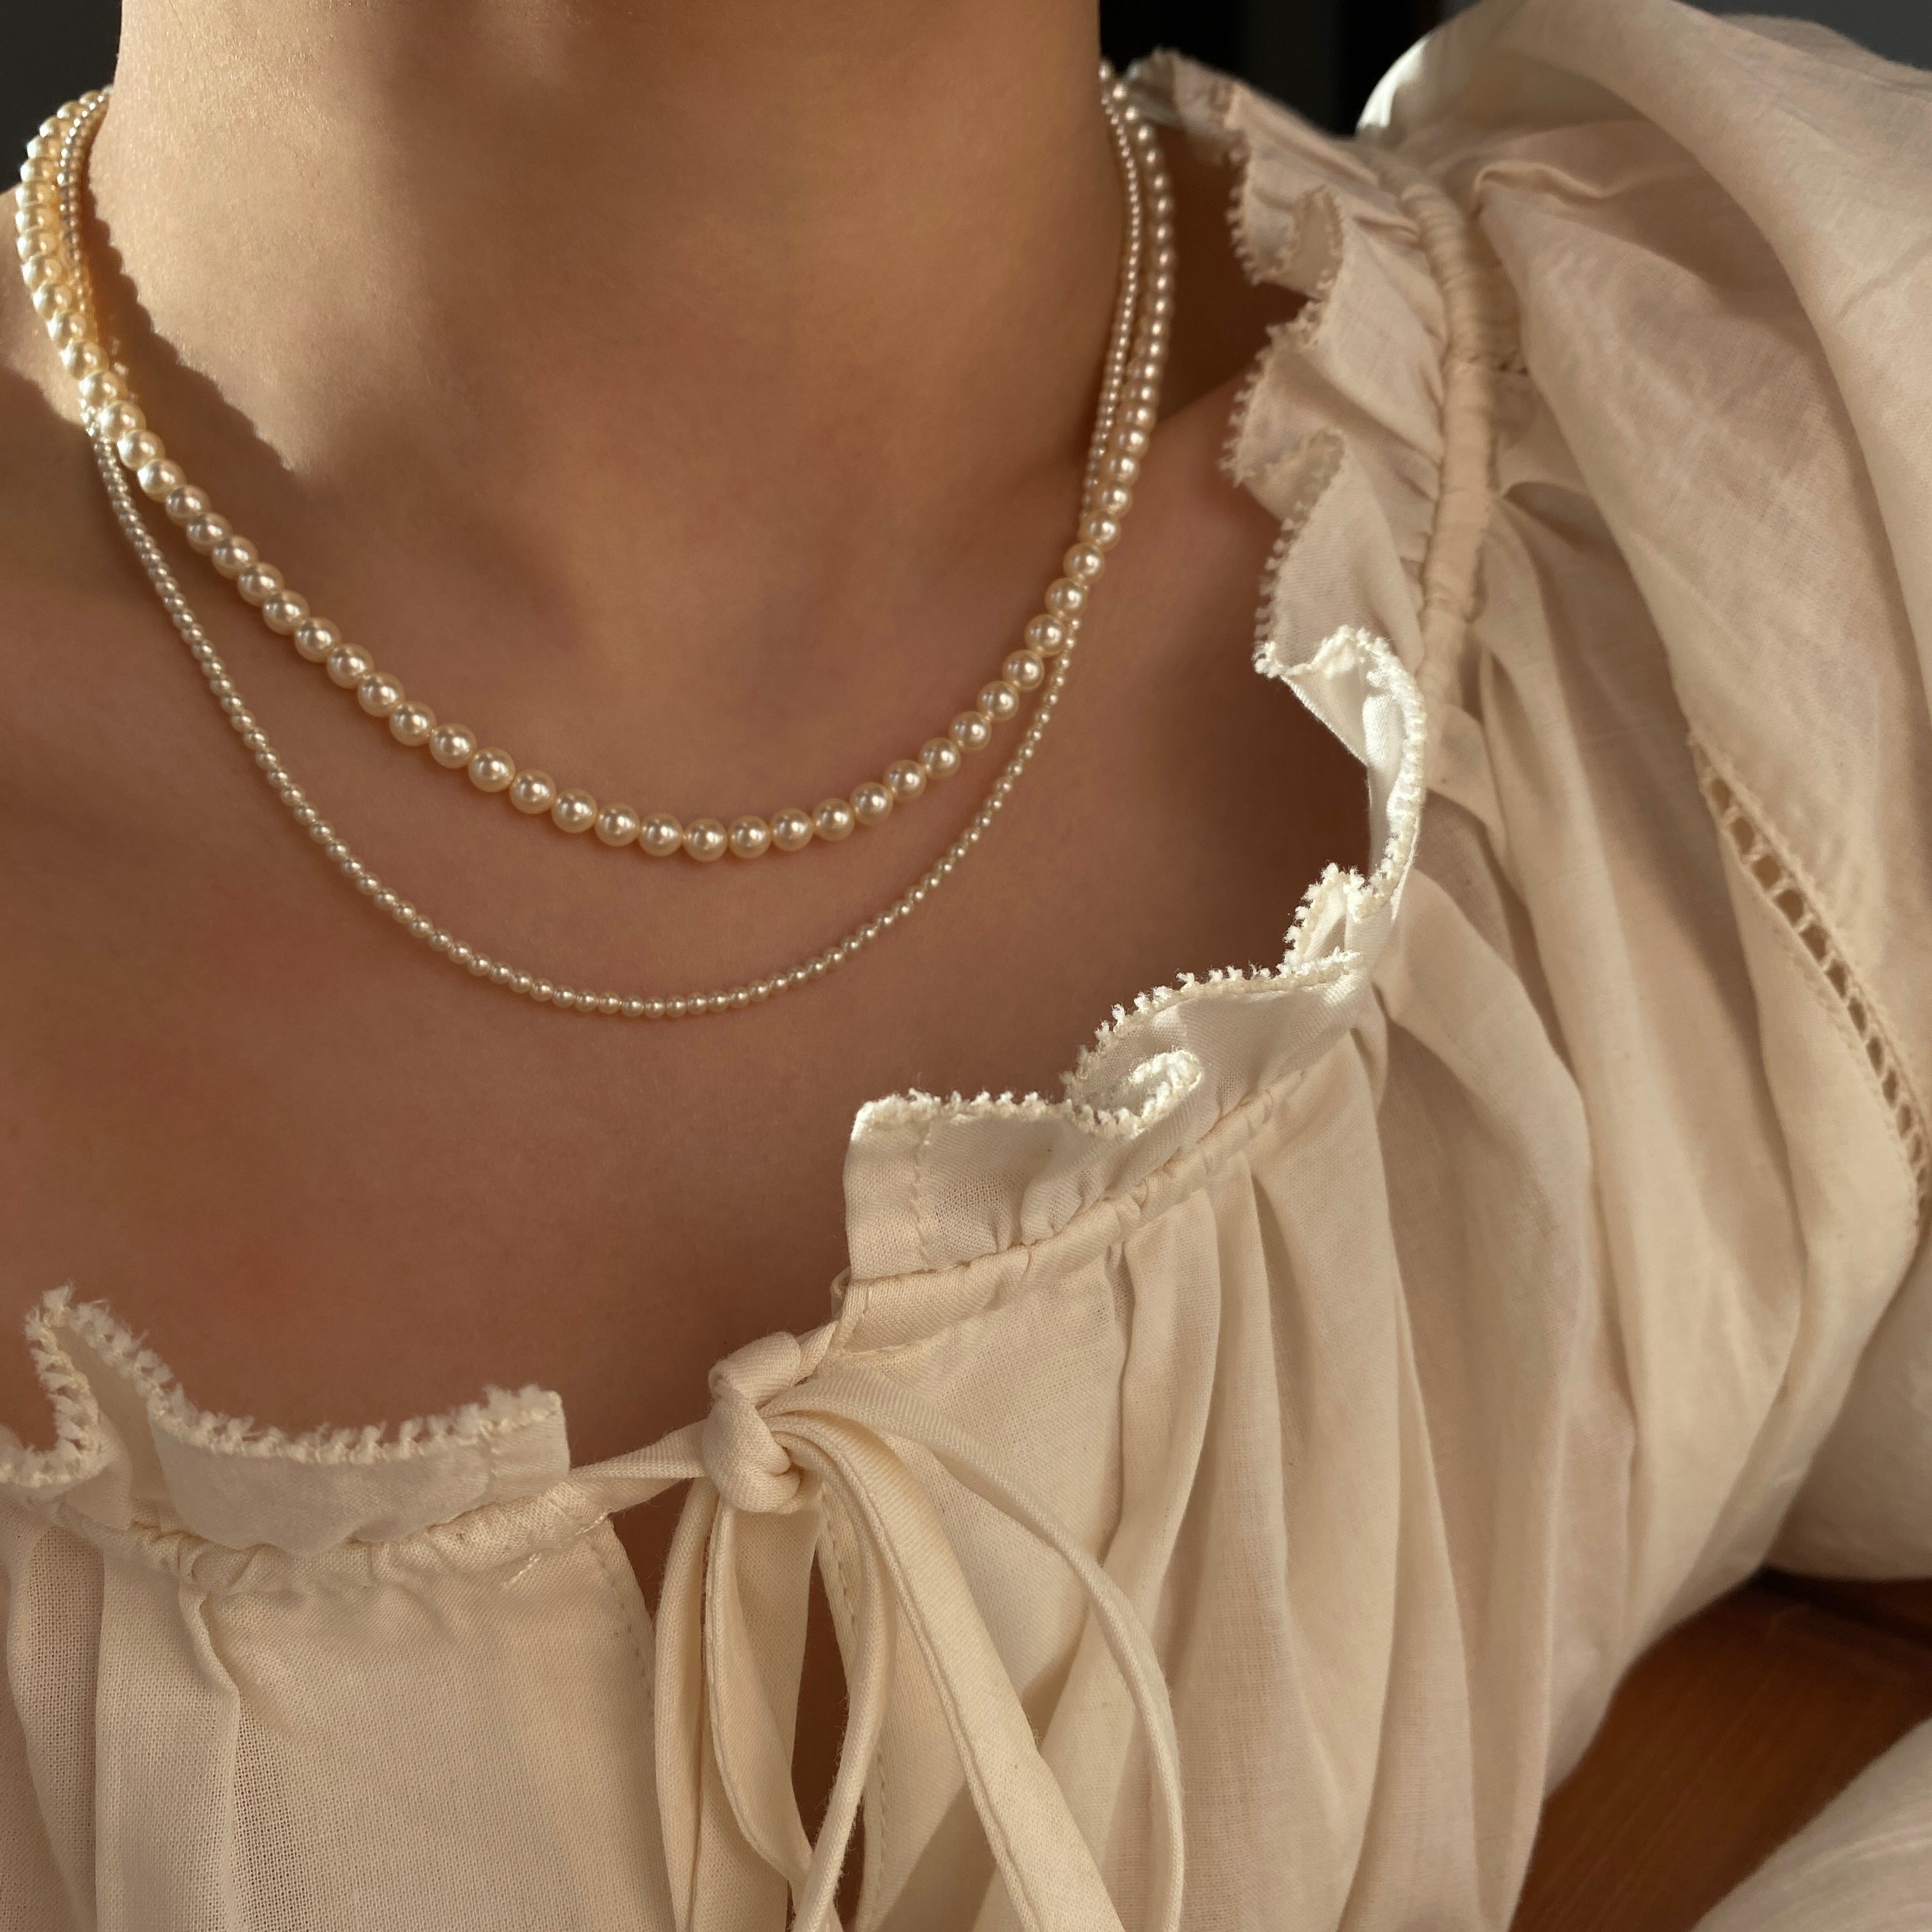 Handmade 14K Gold-Covered Pearl Necklace